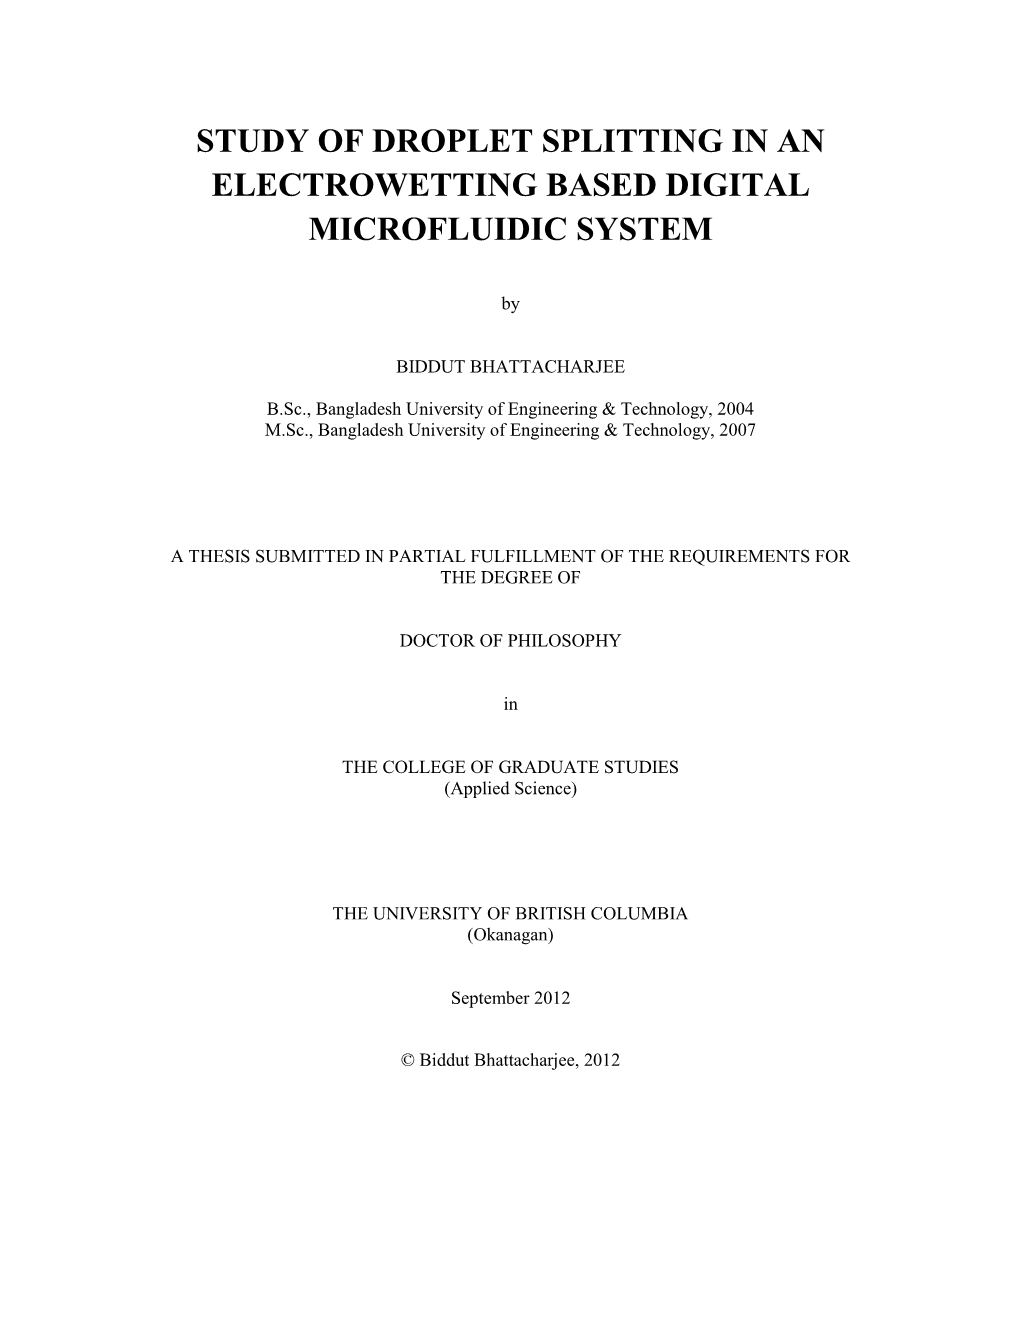 Study of Droplet Splitting in an Electrowetting Based Digital Microfluidic System